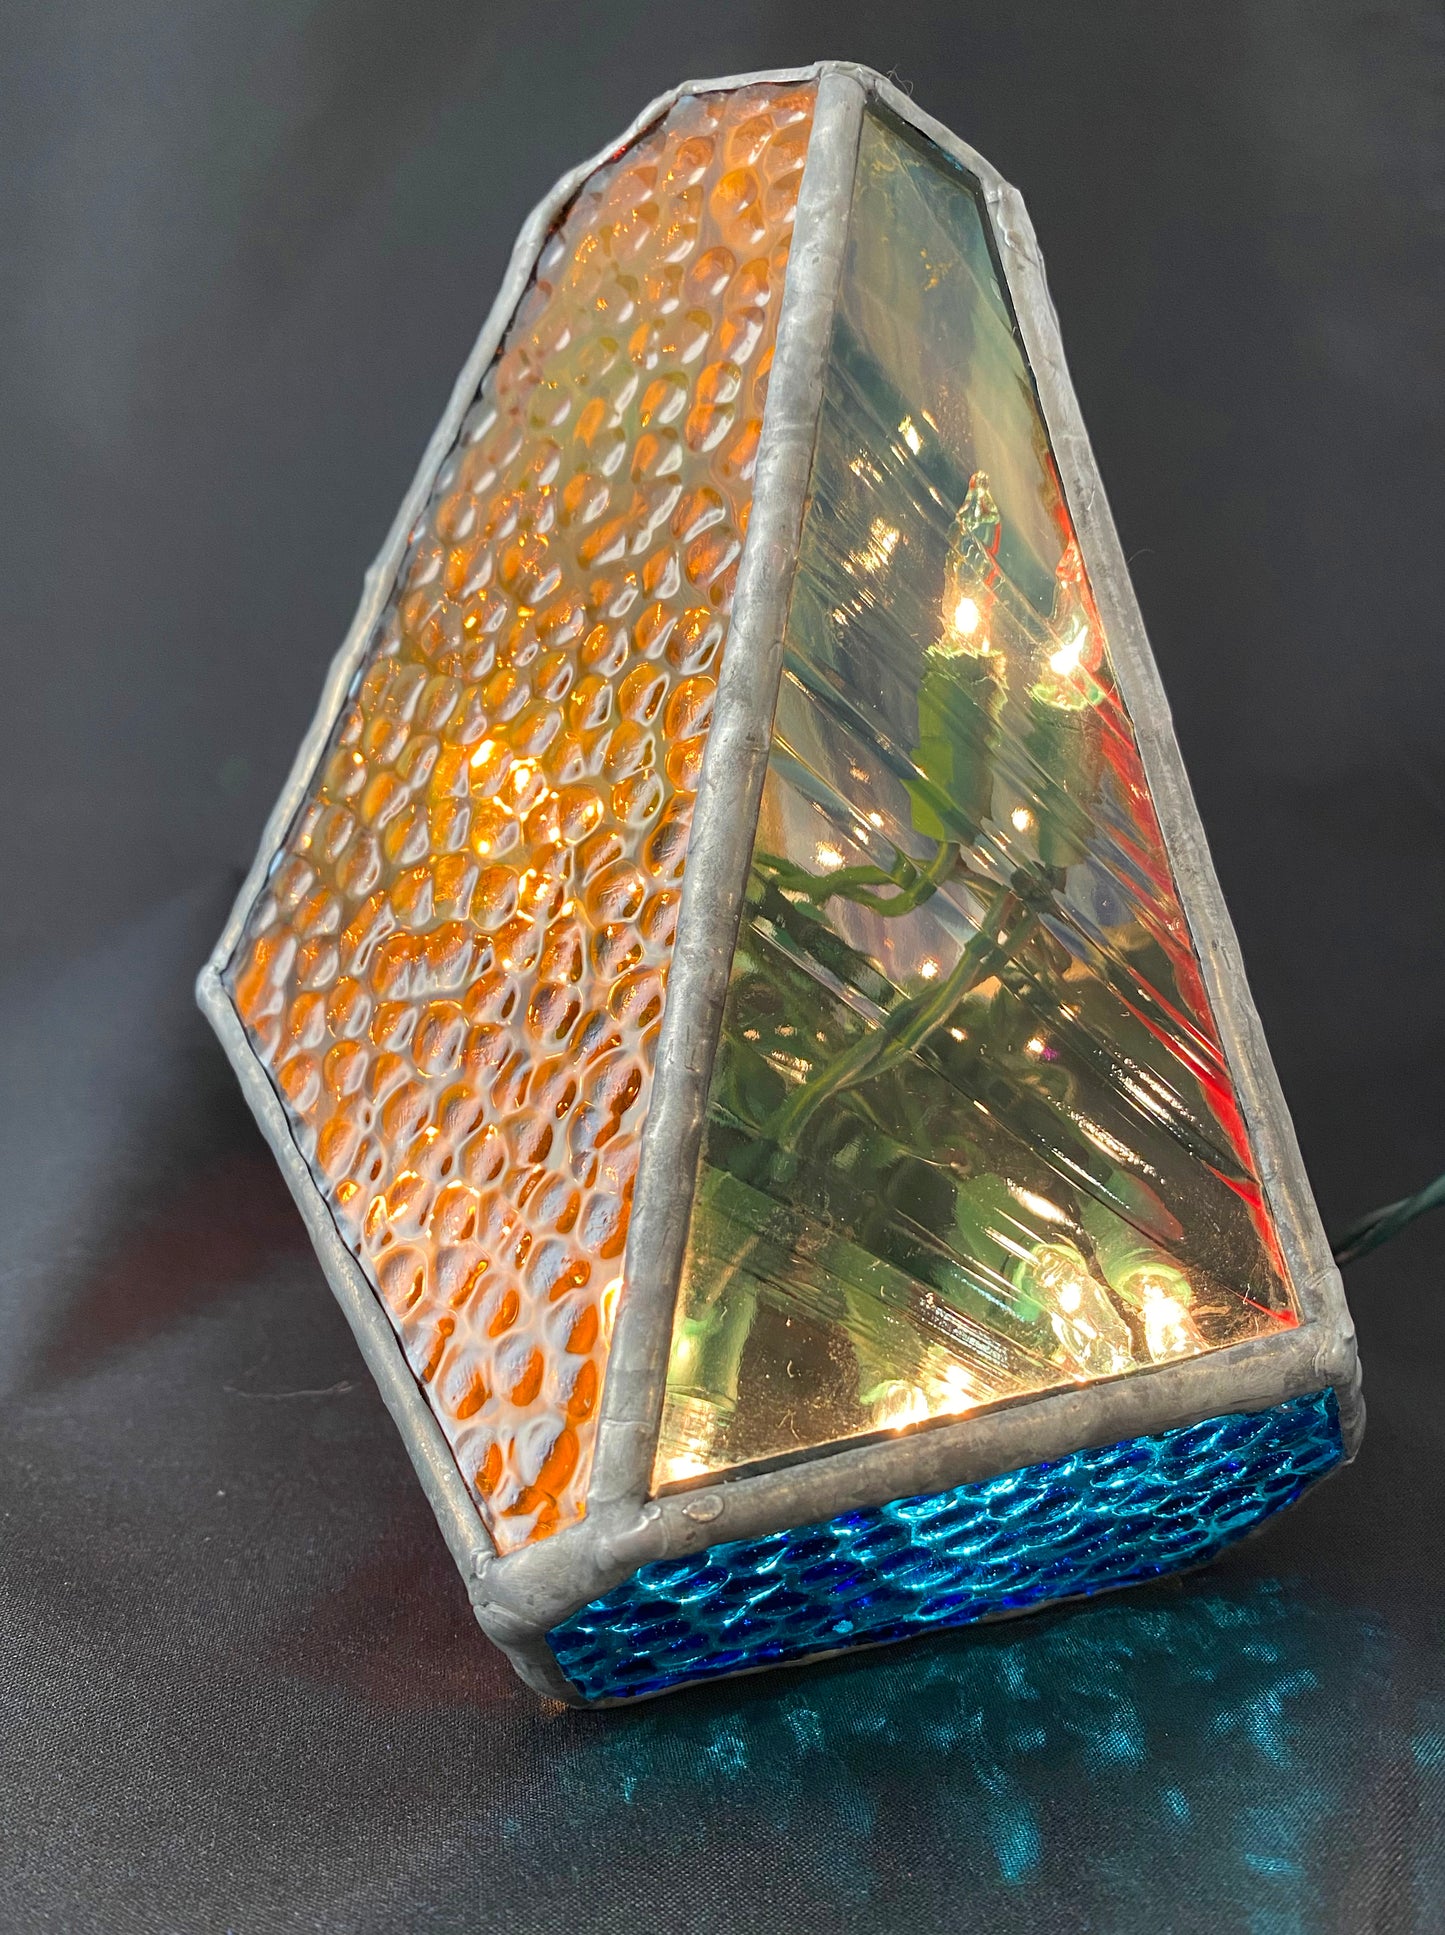 Lighted Gem: Stained Glass Rock Candy Lamp